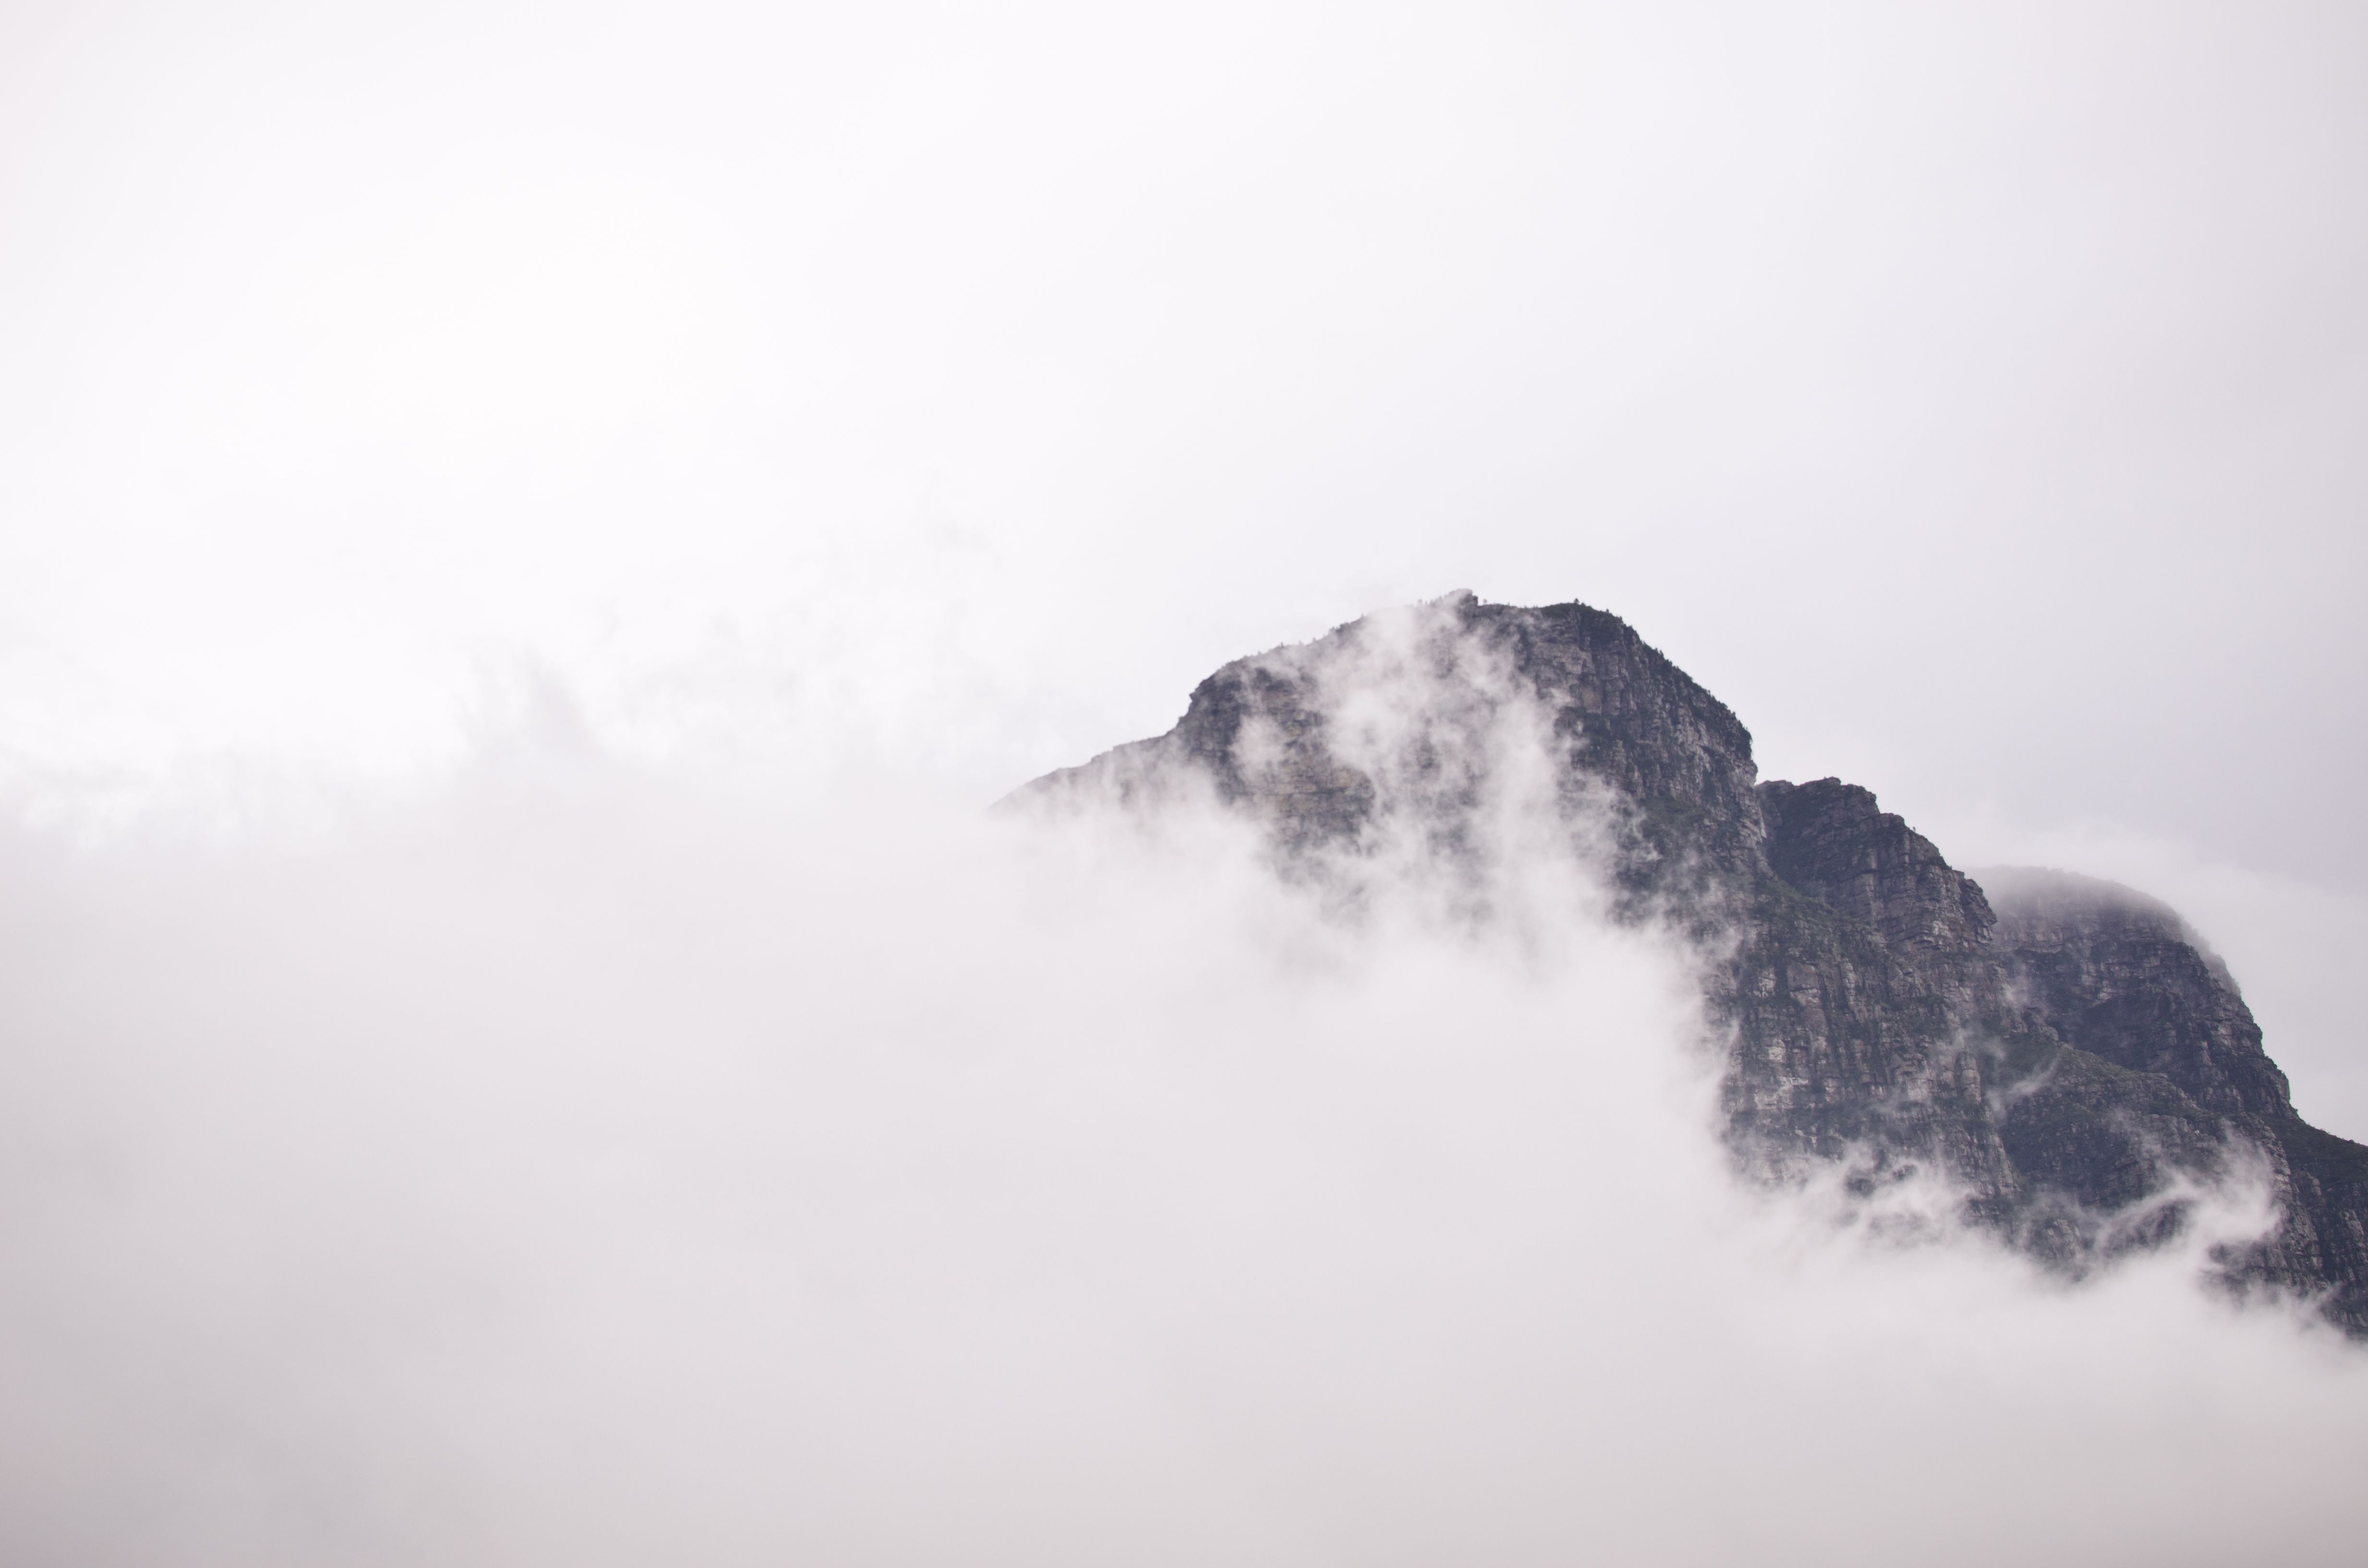 A mountain with clouds and fog in the background - Clean